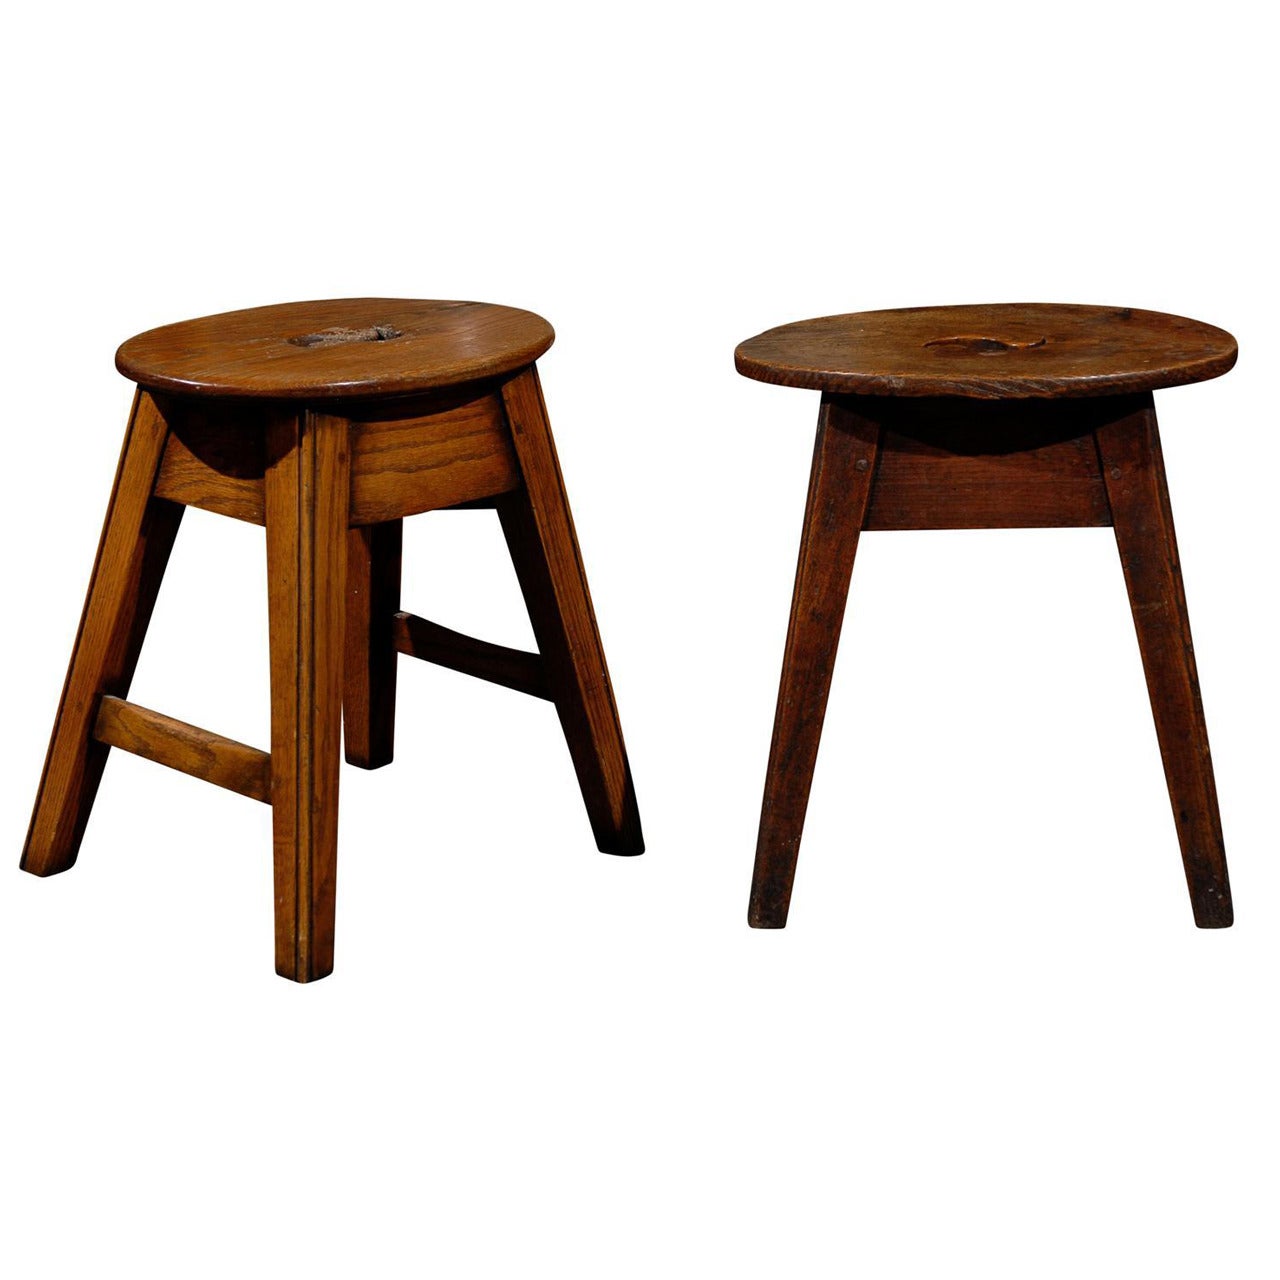 English Oval Top Oak Stool with Splayed Legs and Side Stretcher, circa 1880